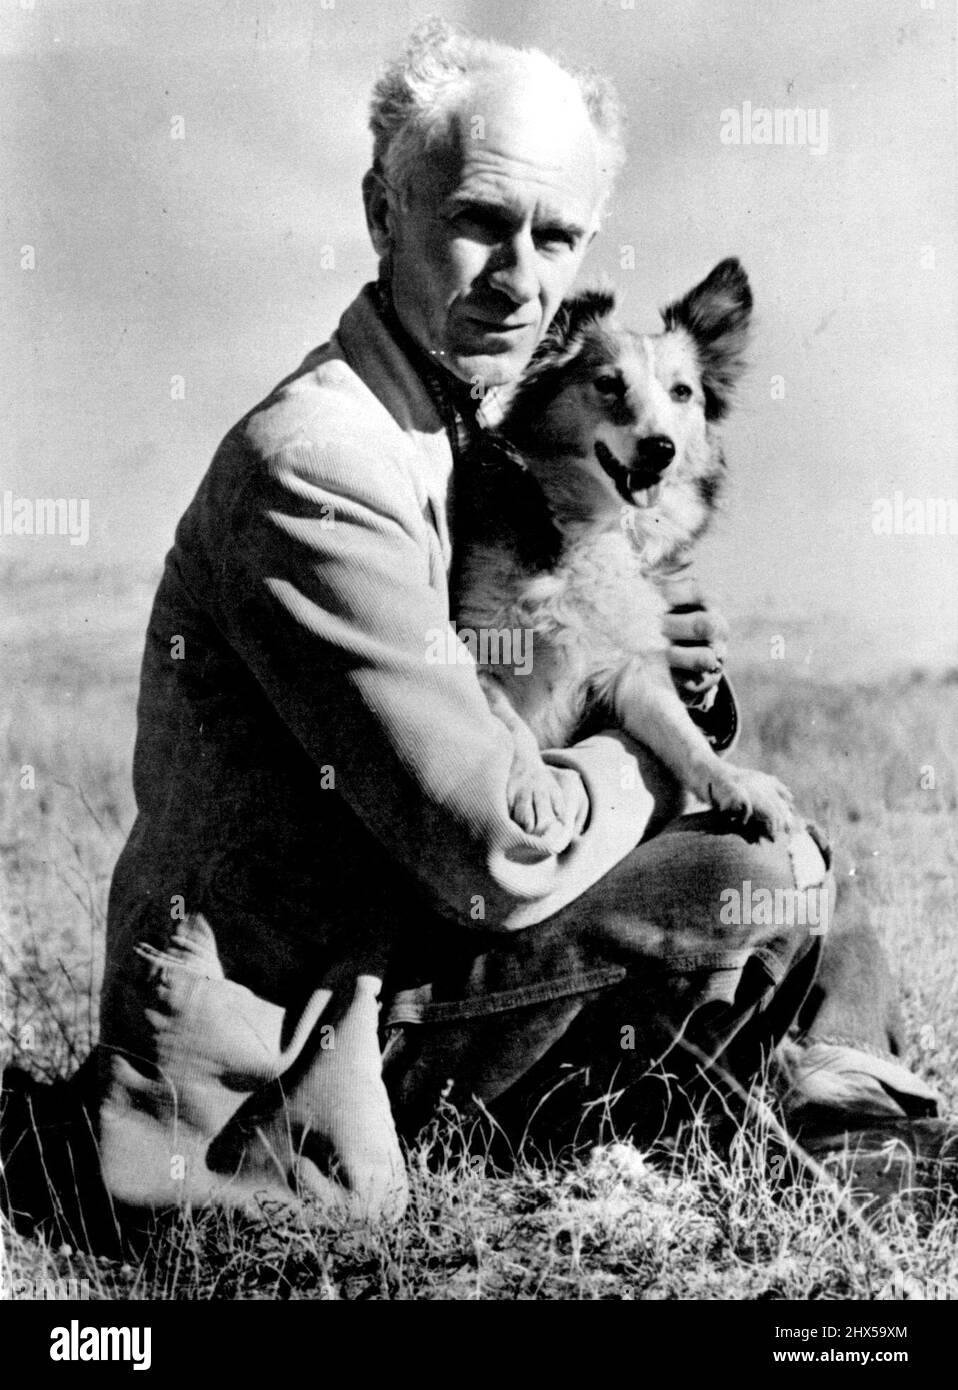 Ernie Pyle And His Dog -- Ernie Pyle and his Shetland Sheep dog Cheetah Sun Themselves on the Mesa outside his home in Albuquerque, N.M. after the Noted Correspondent and Author returned from the European Theater of Operations. Pyle was reported April 18 to have been Killed in on Ie Jima, Northwest of Okinawa, by a Japanese Machine gun gullet. April 18, 1945. (Photo by Bob Landry, Associated Press Photo). Stock Photo